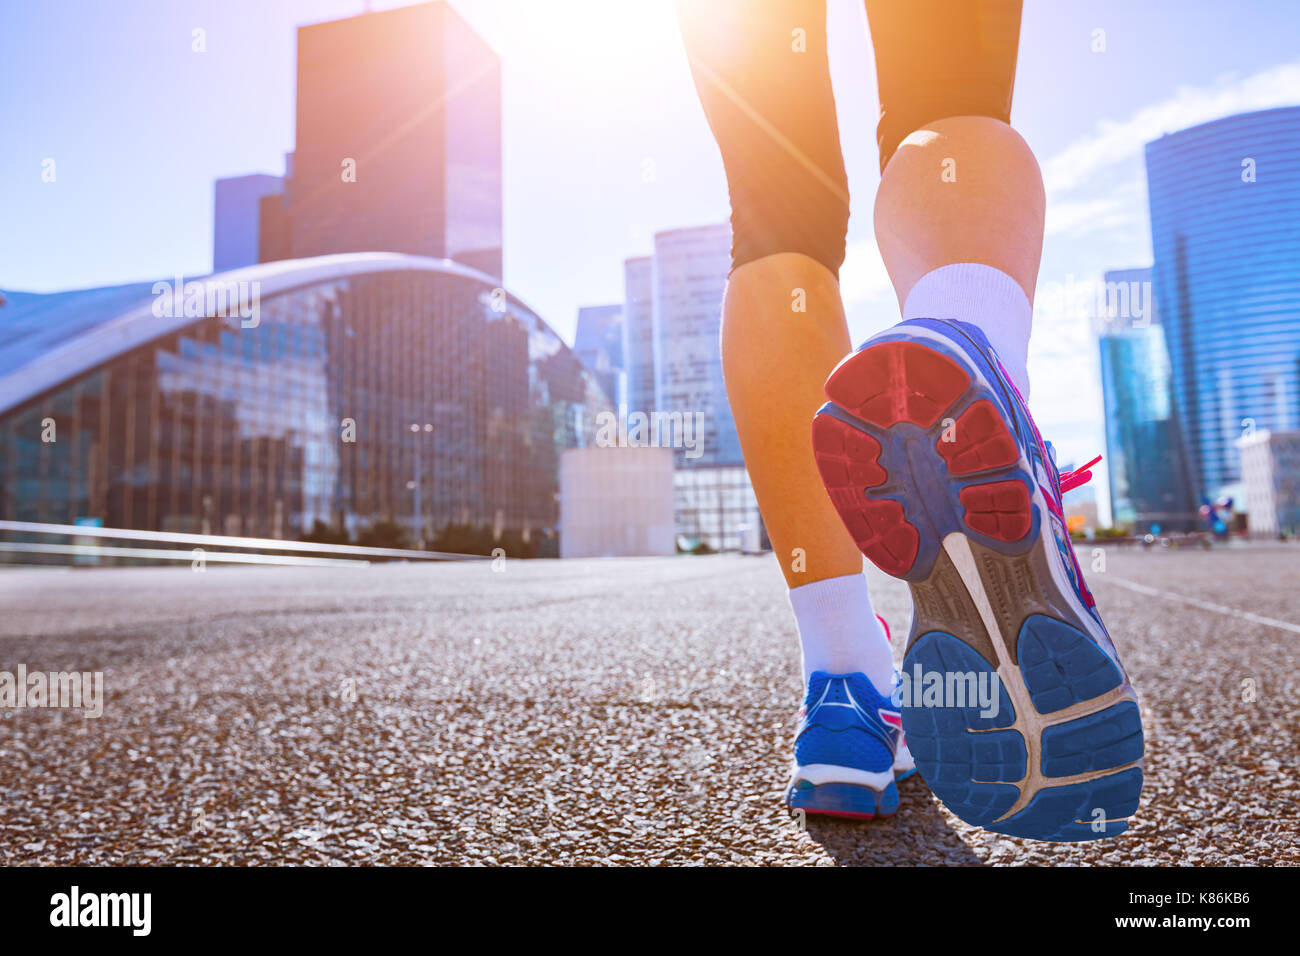 Close-up of running shoes, woman running in a city Stock Photo